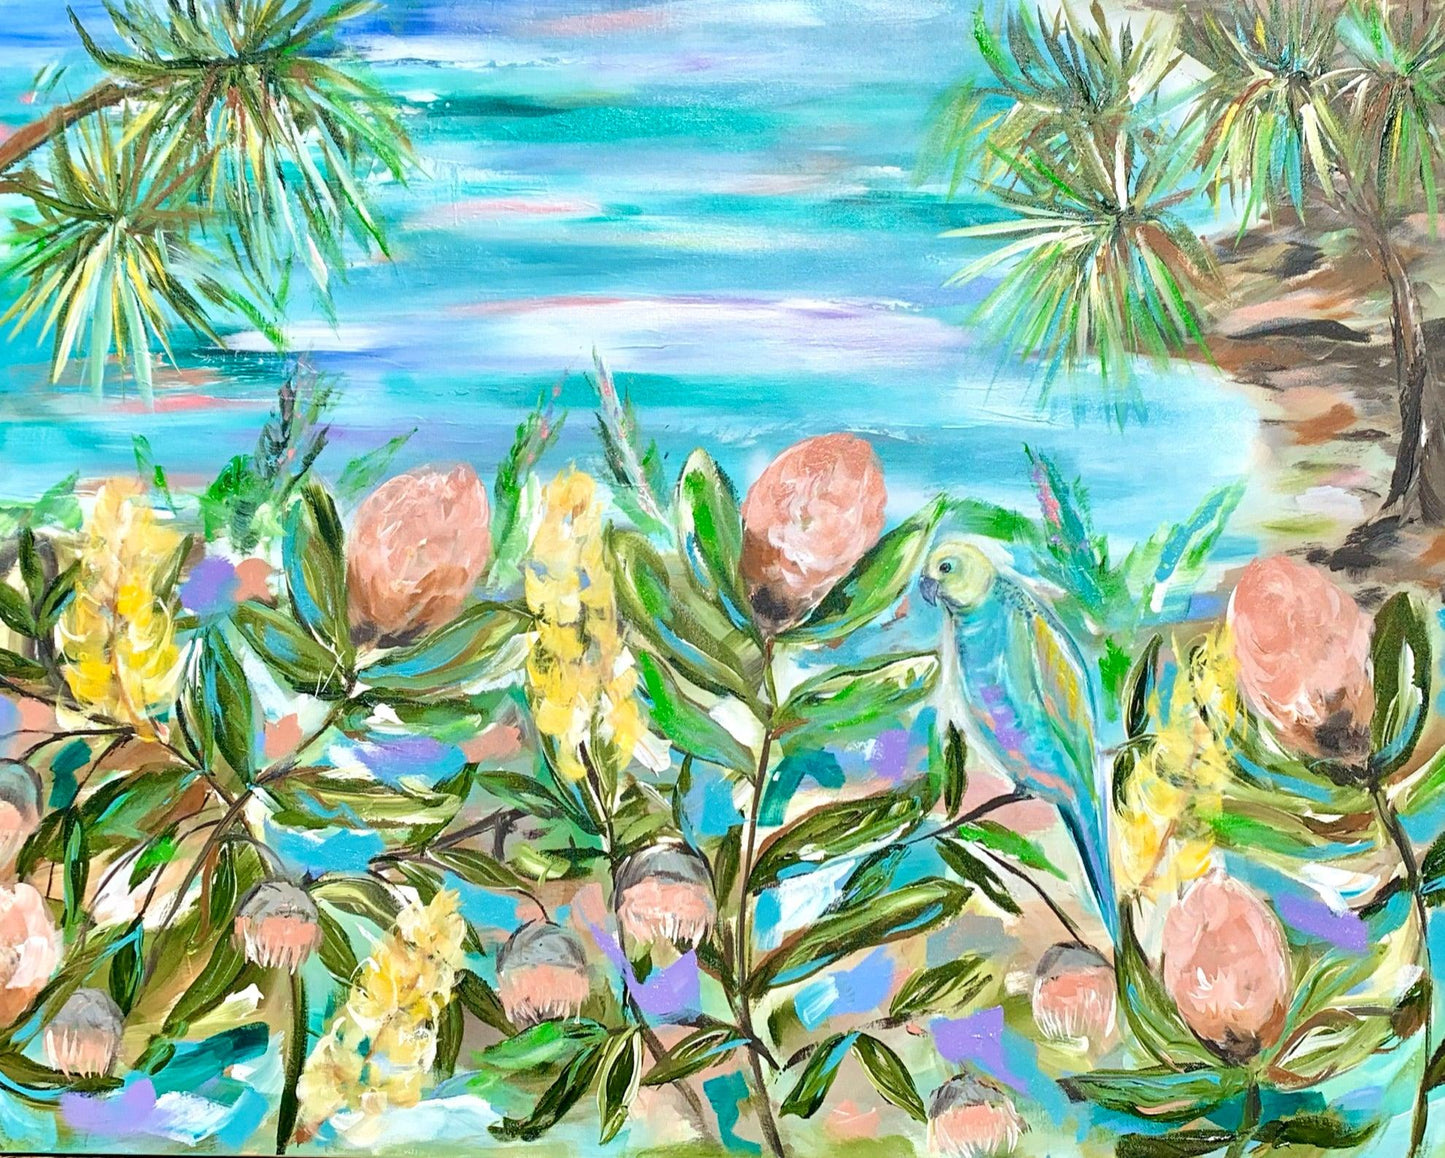 Proteas by the Bay - 1.2 x 900 - Original Artwork - Available by Commission